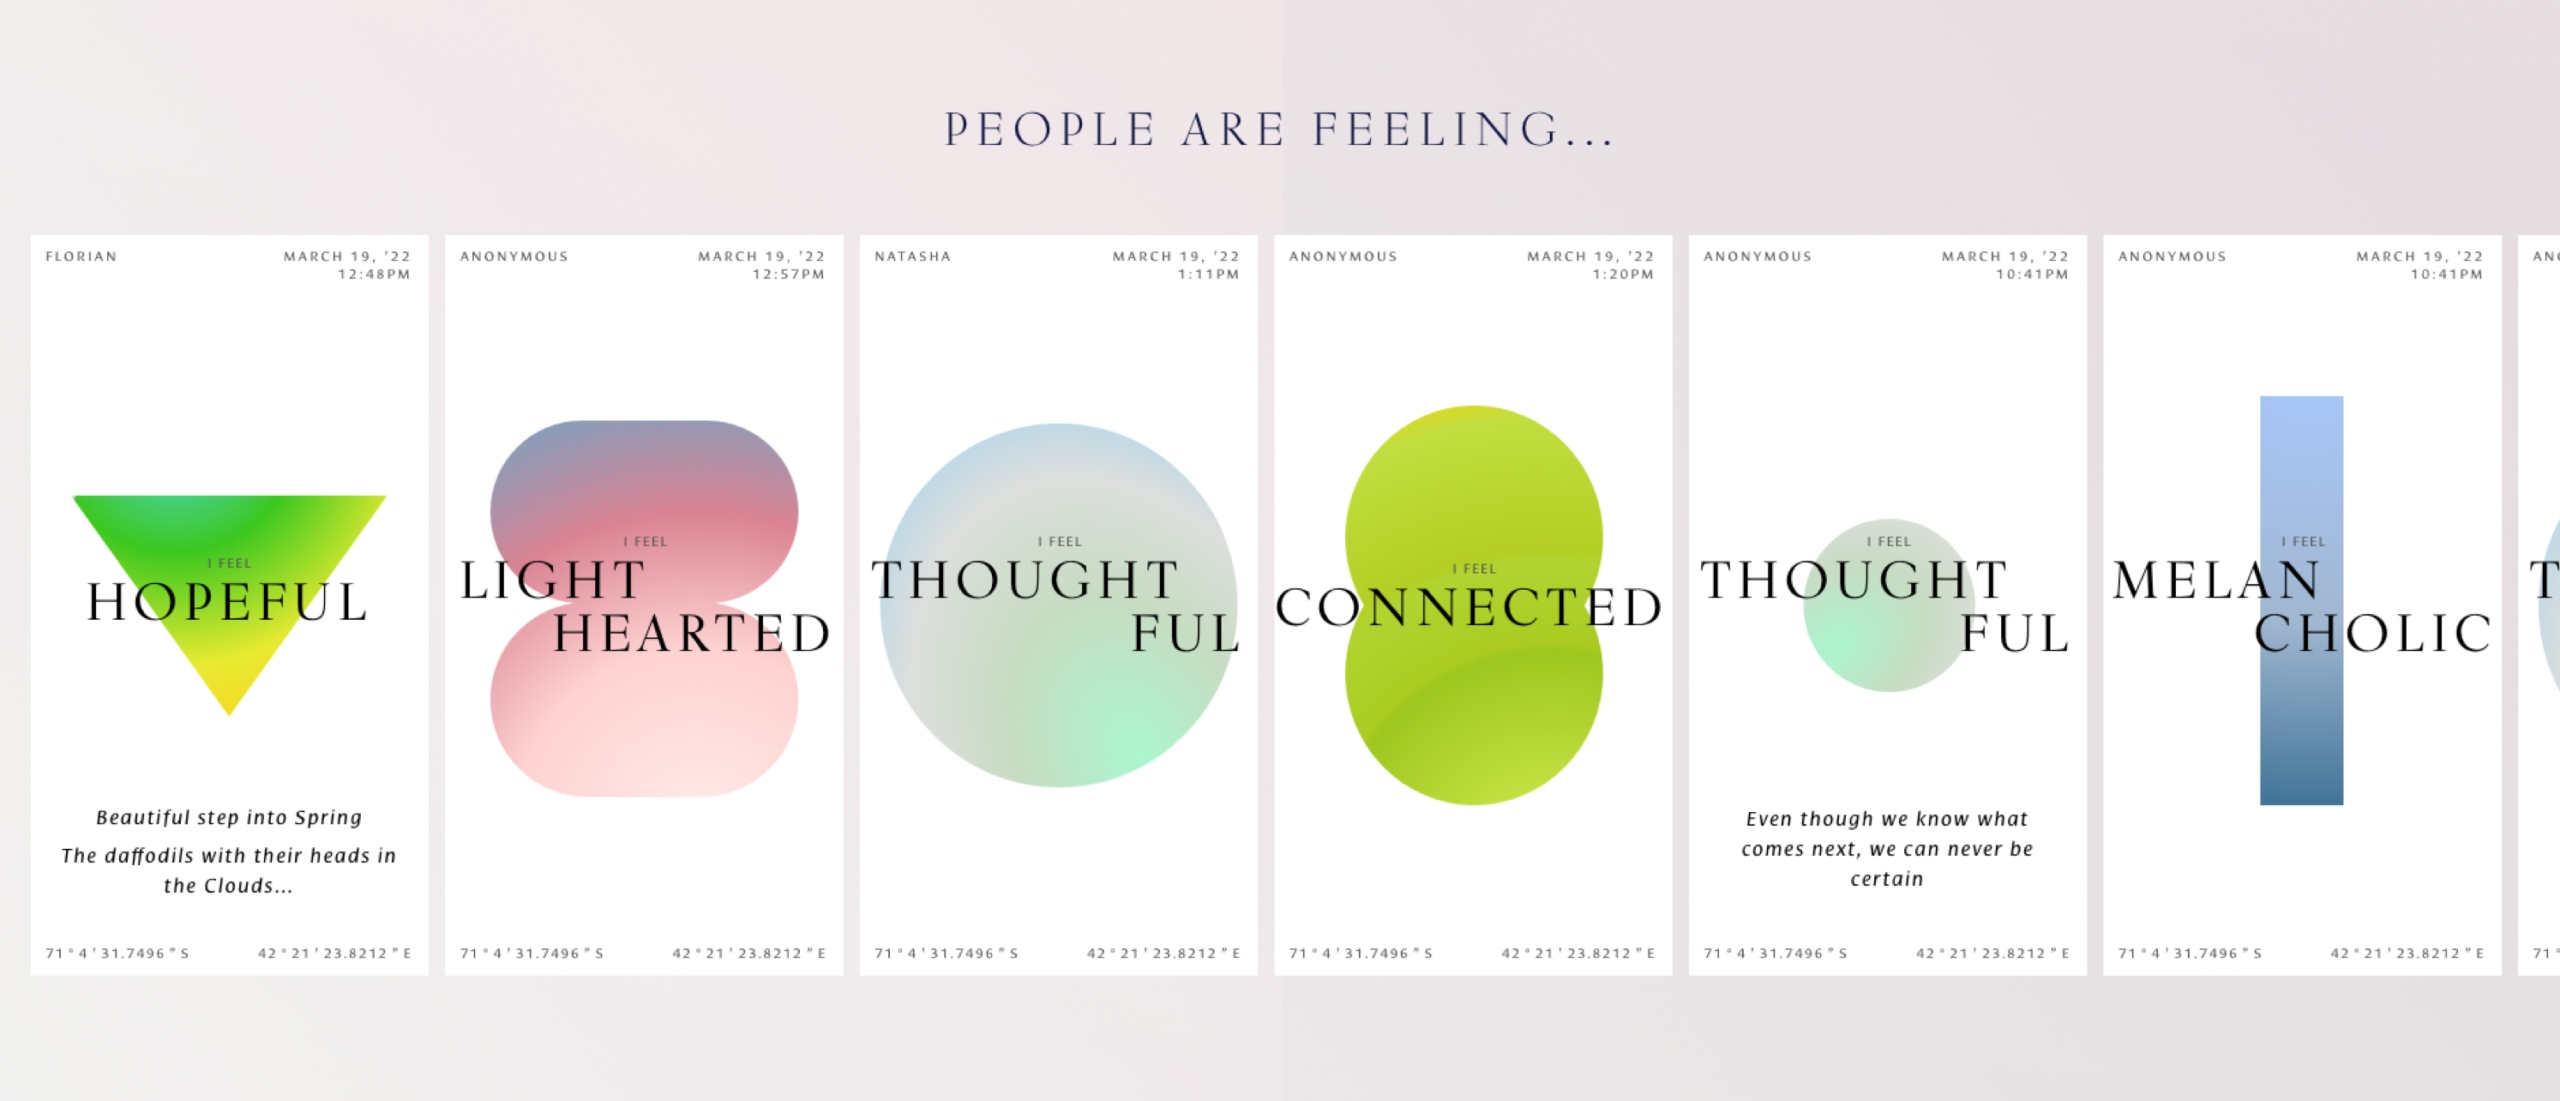 The top of the page says “People are feeling…” and six columns each feature a coloures shape and a word: “hopeful” “light hearted” ”thoughtful”, “connected’, ”thoughtful”, and “melancholic”